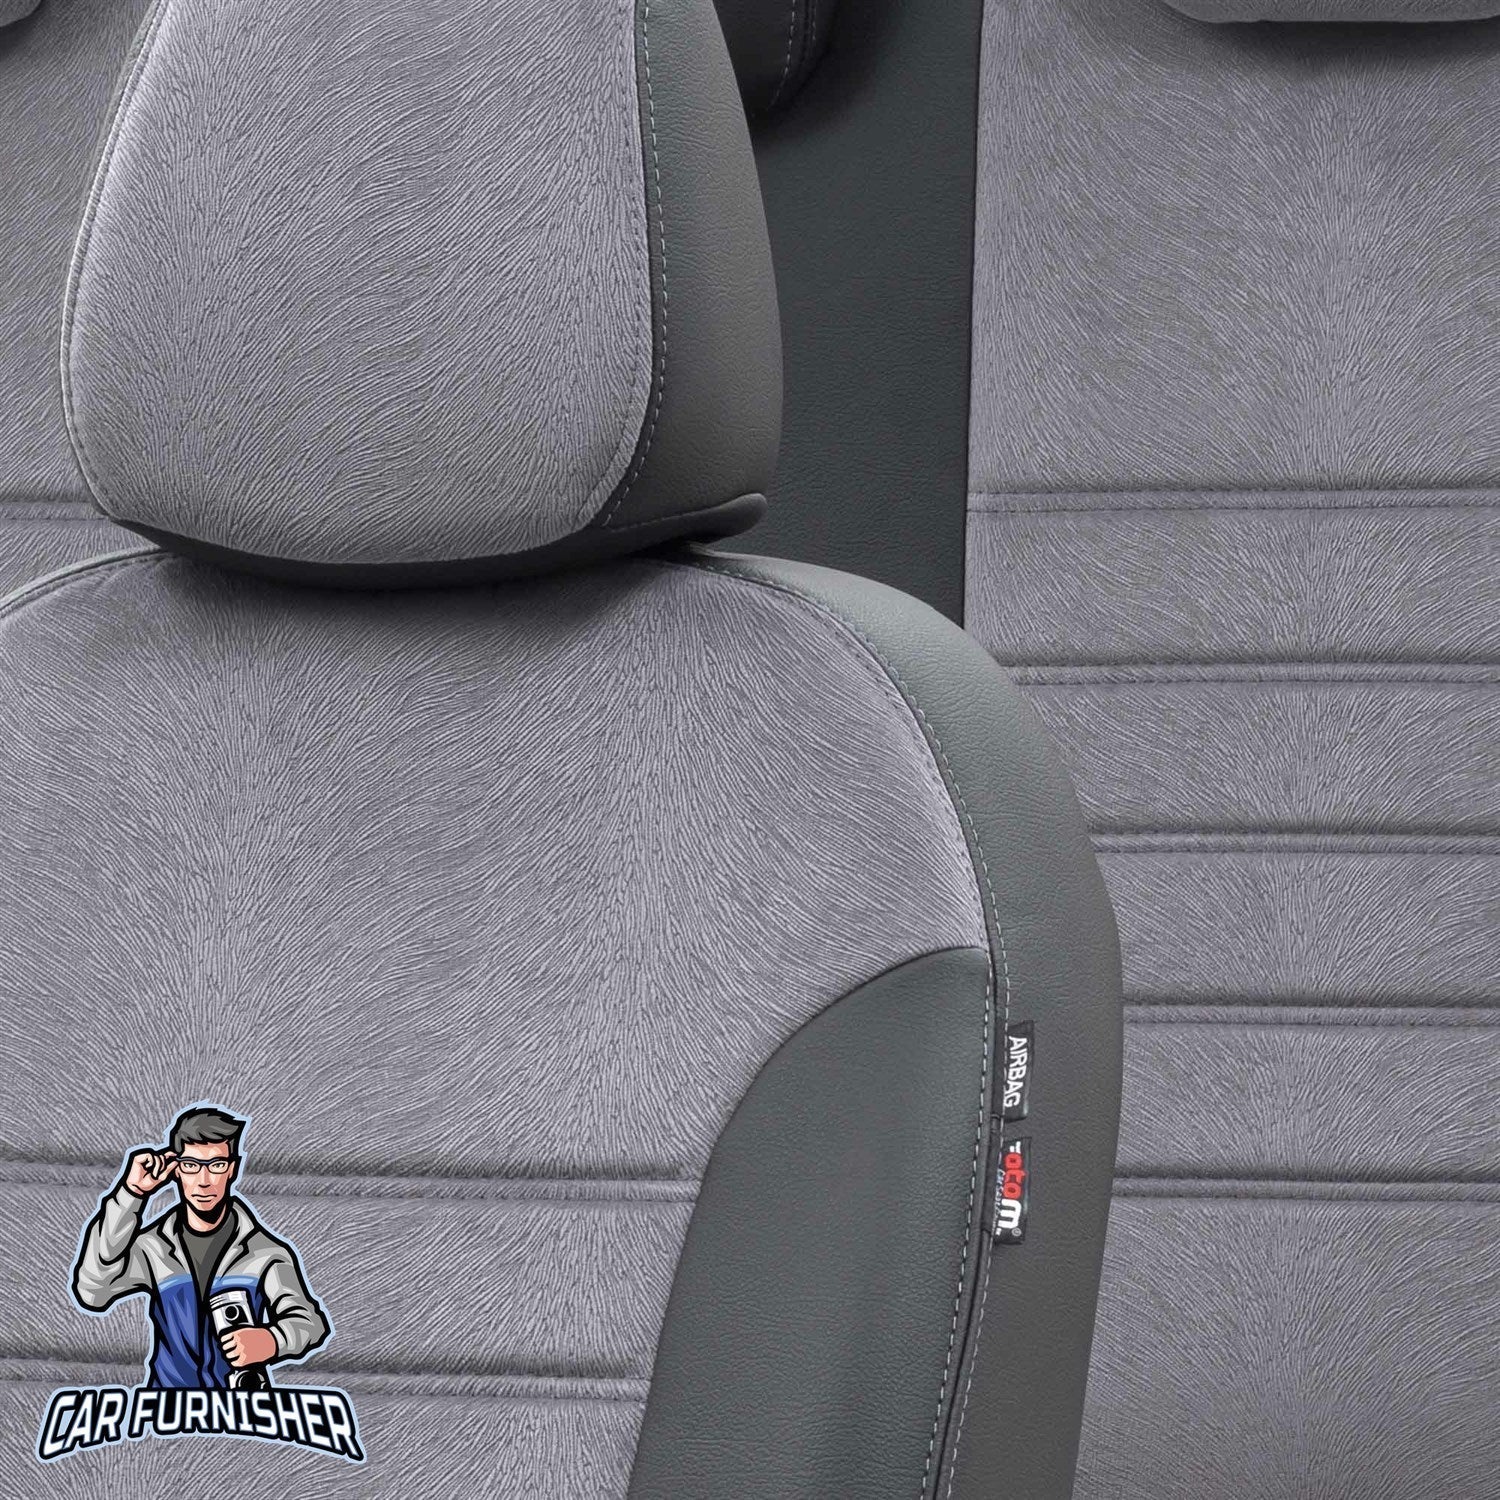 Ford F-Max Seat Cover London Foal Feather Design Smoked Black Front Seats (2 Seats + Handrest + Headrests) Leather & Foal Feather